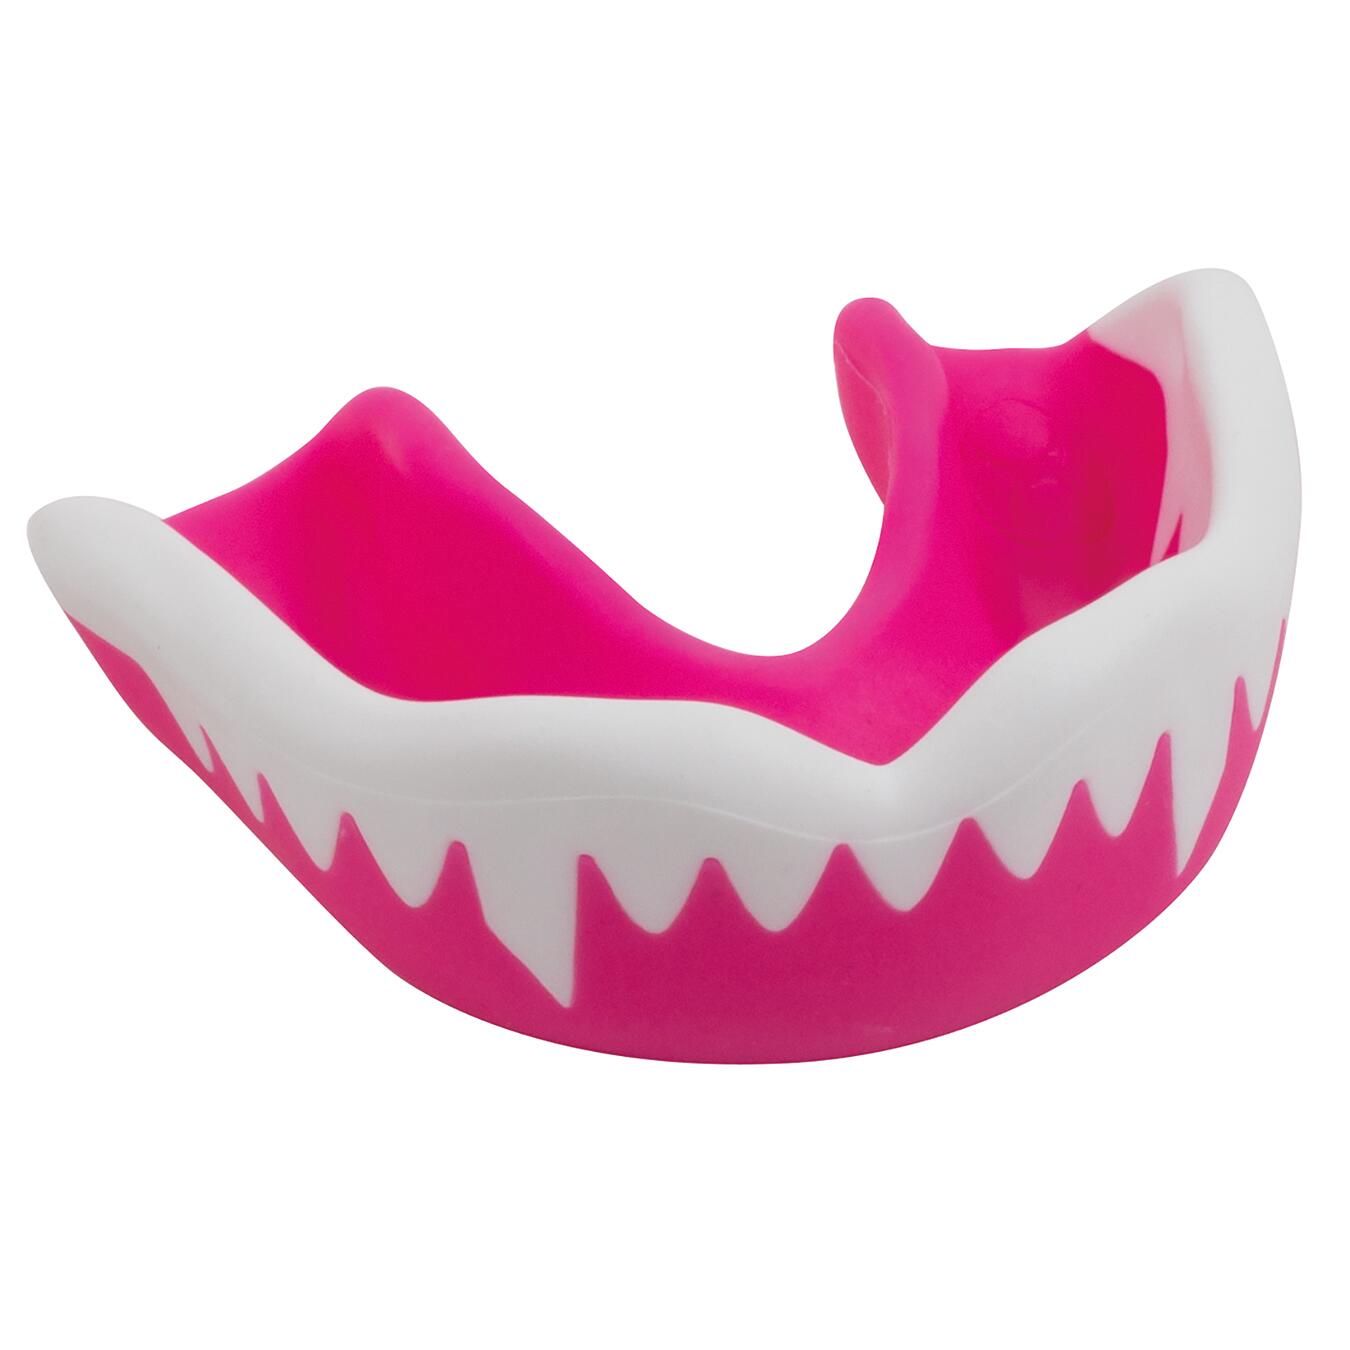 Viper Mouthguard - Red / Black - Adult 2/3